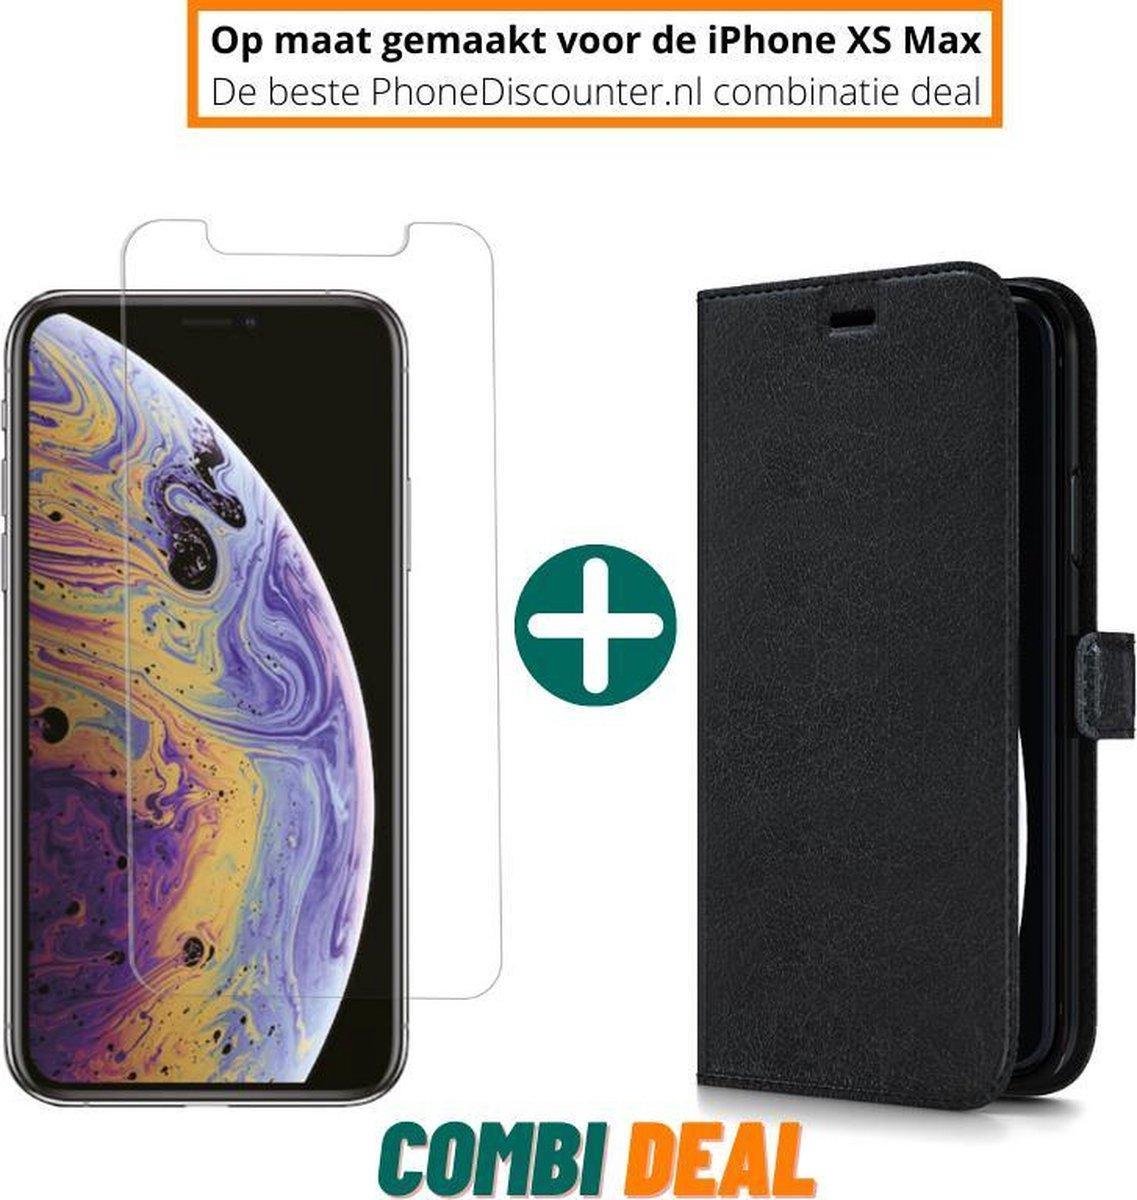 iphone xs max hoesje zwart | iPhone XS Max A1921 beschermhoes full body | iPhone XS Max wallet hoes zwart | hoesje iphone xs max apple | iPhone XS Max boekhoesje + iPhone XS Max tempered glass screenprotector